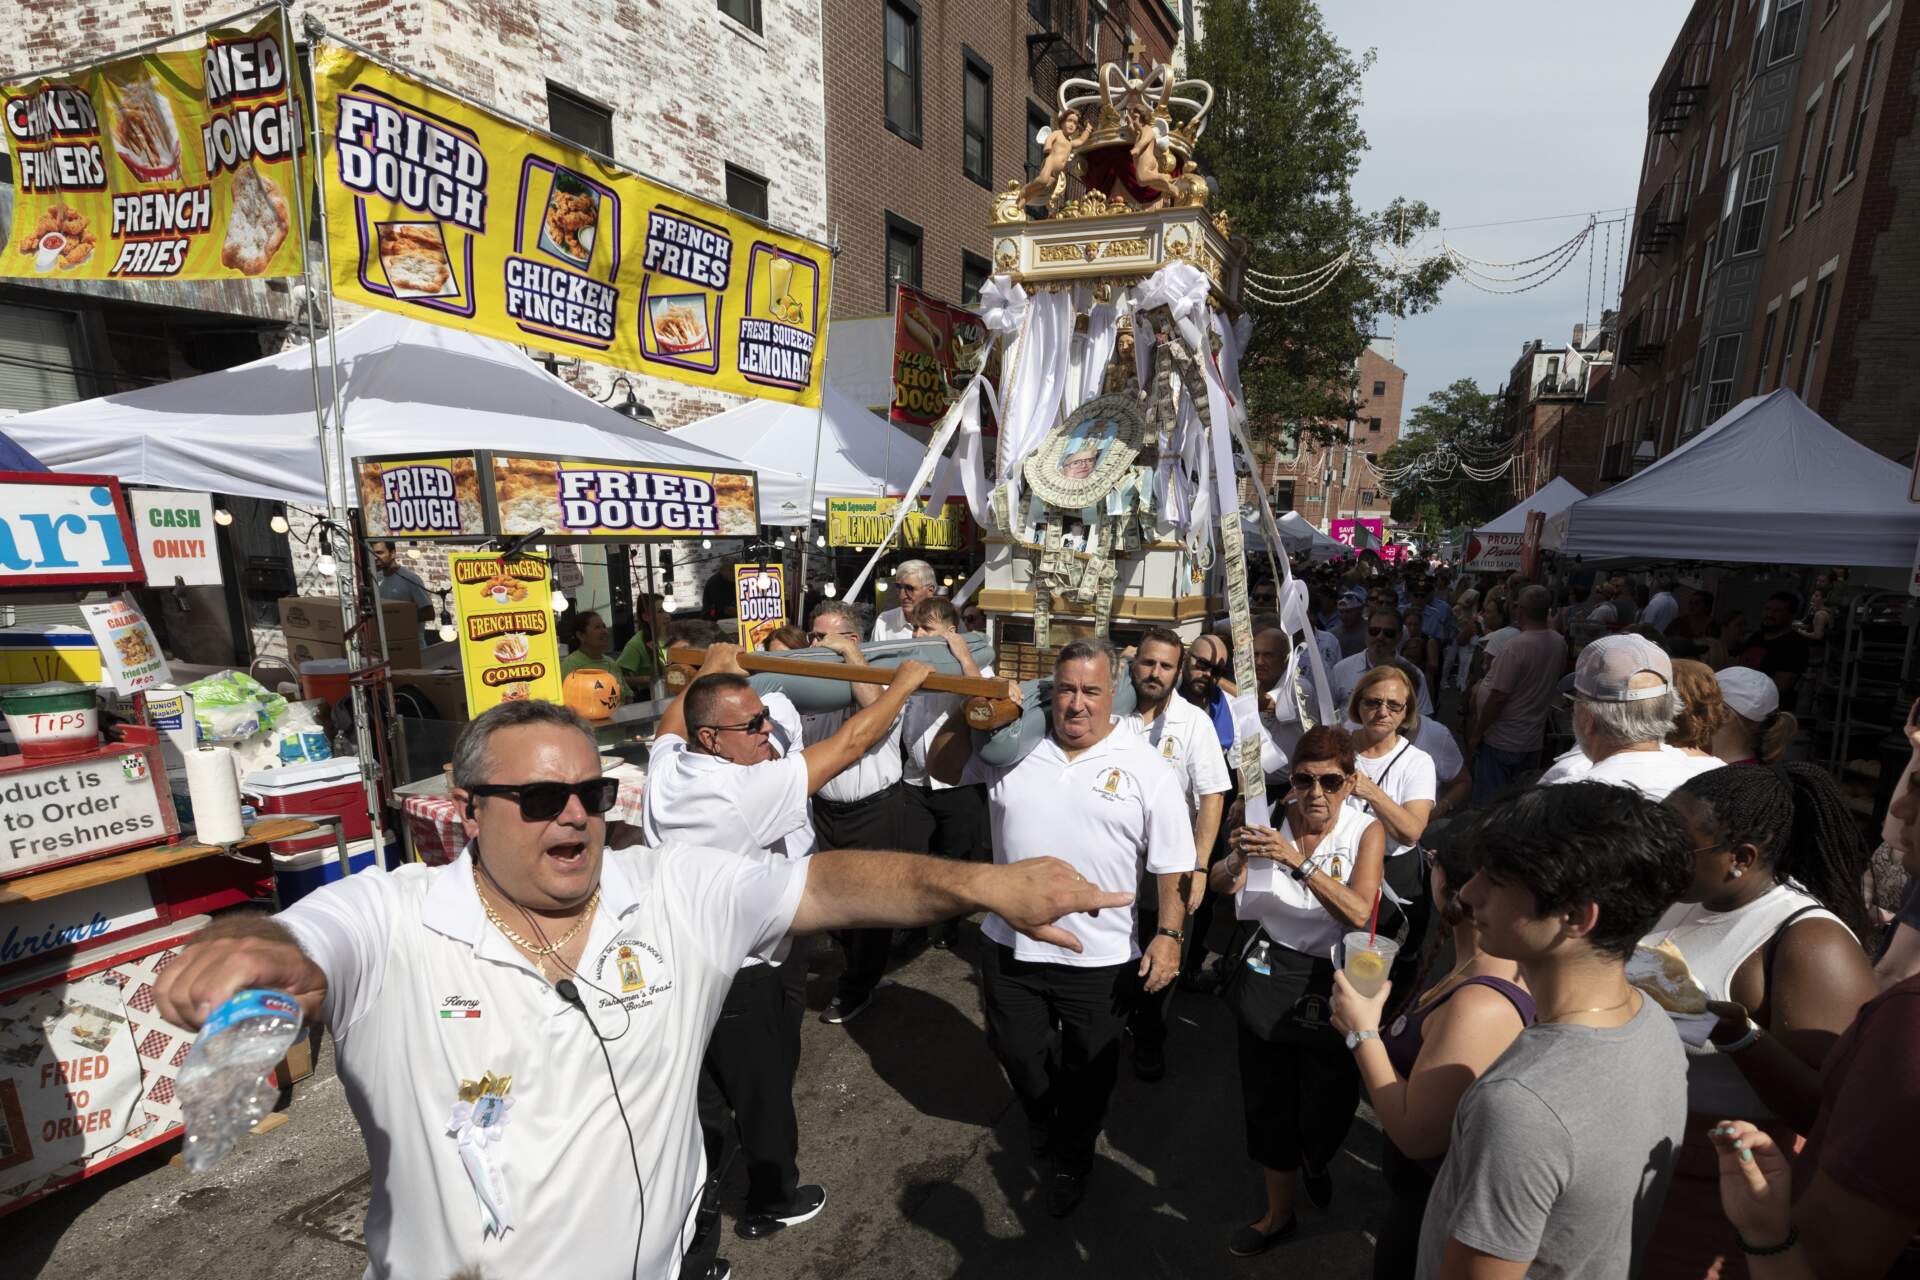 Members of the Madonna Del Soccorso Society carry a statue of the Madonna during the annual Fisherman's Feast in 2022. (Michael Dwyer/AP)